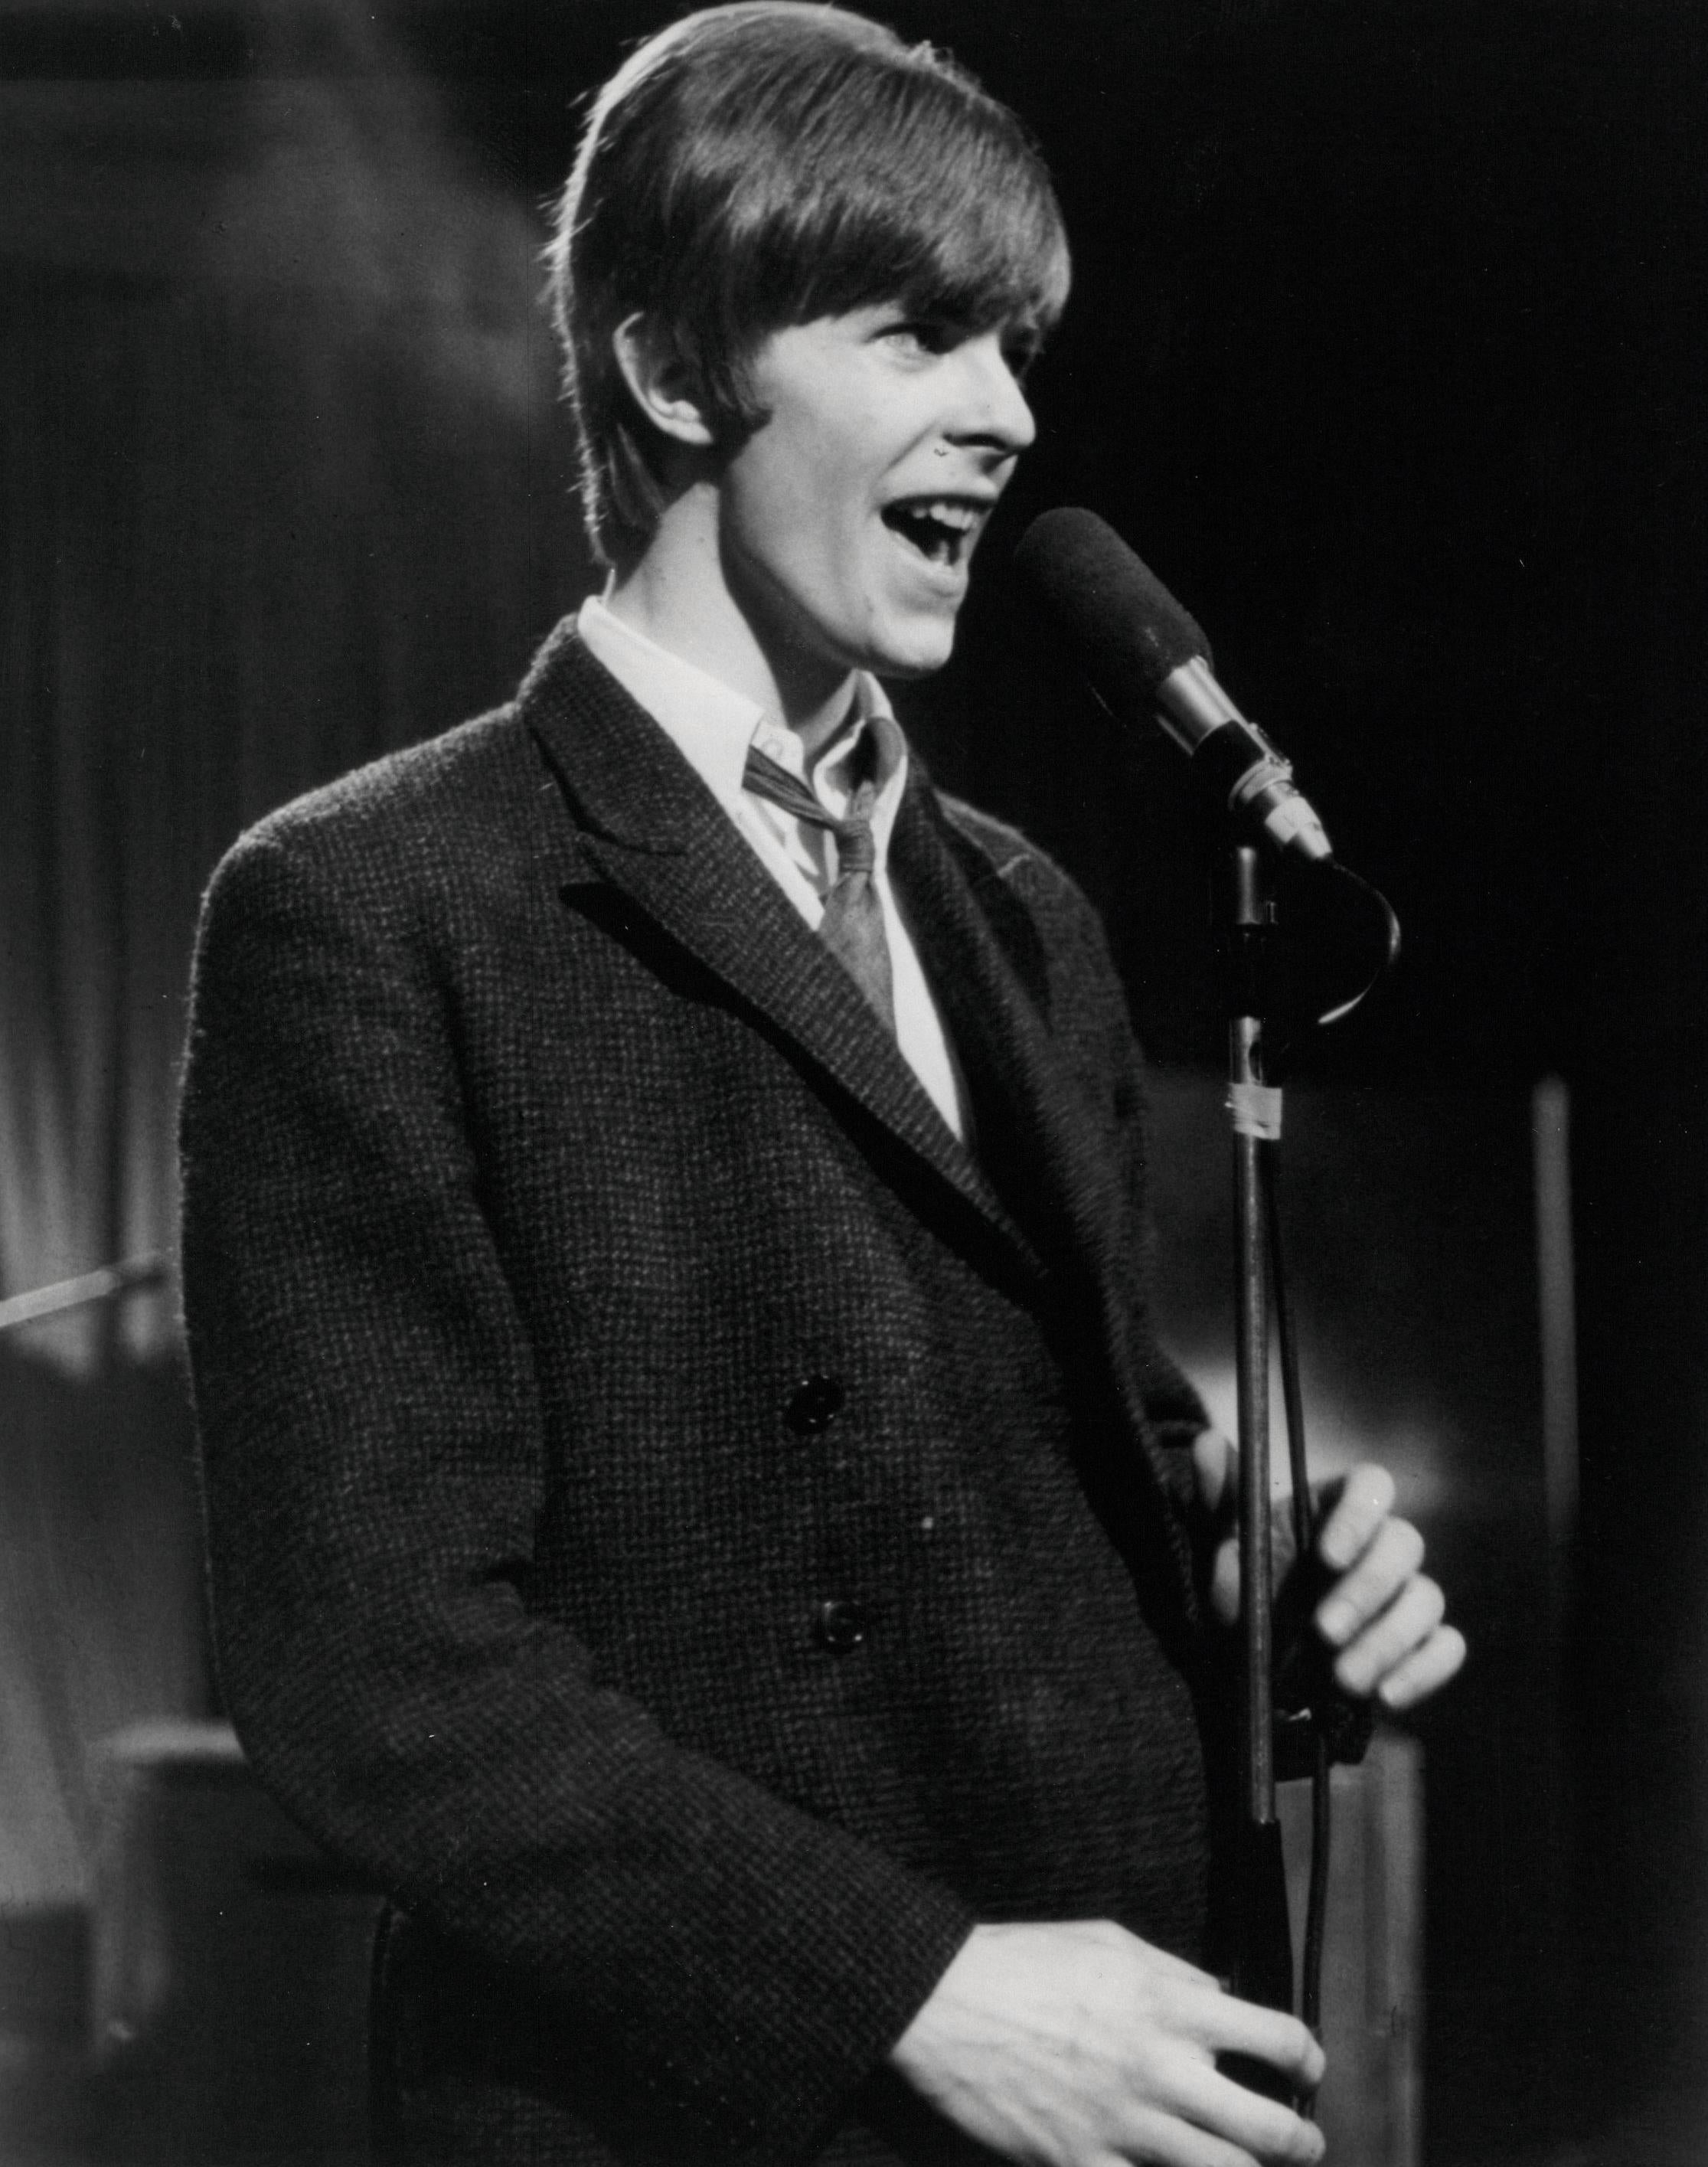 Unknown Black and White Photograph - Young David Bowie Singing on Stage Vintage Original Photograph